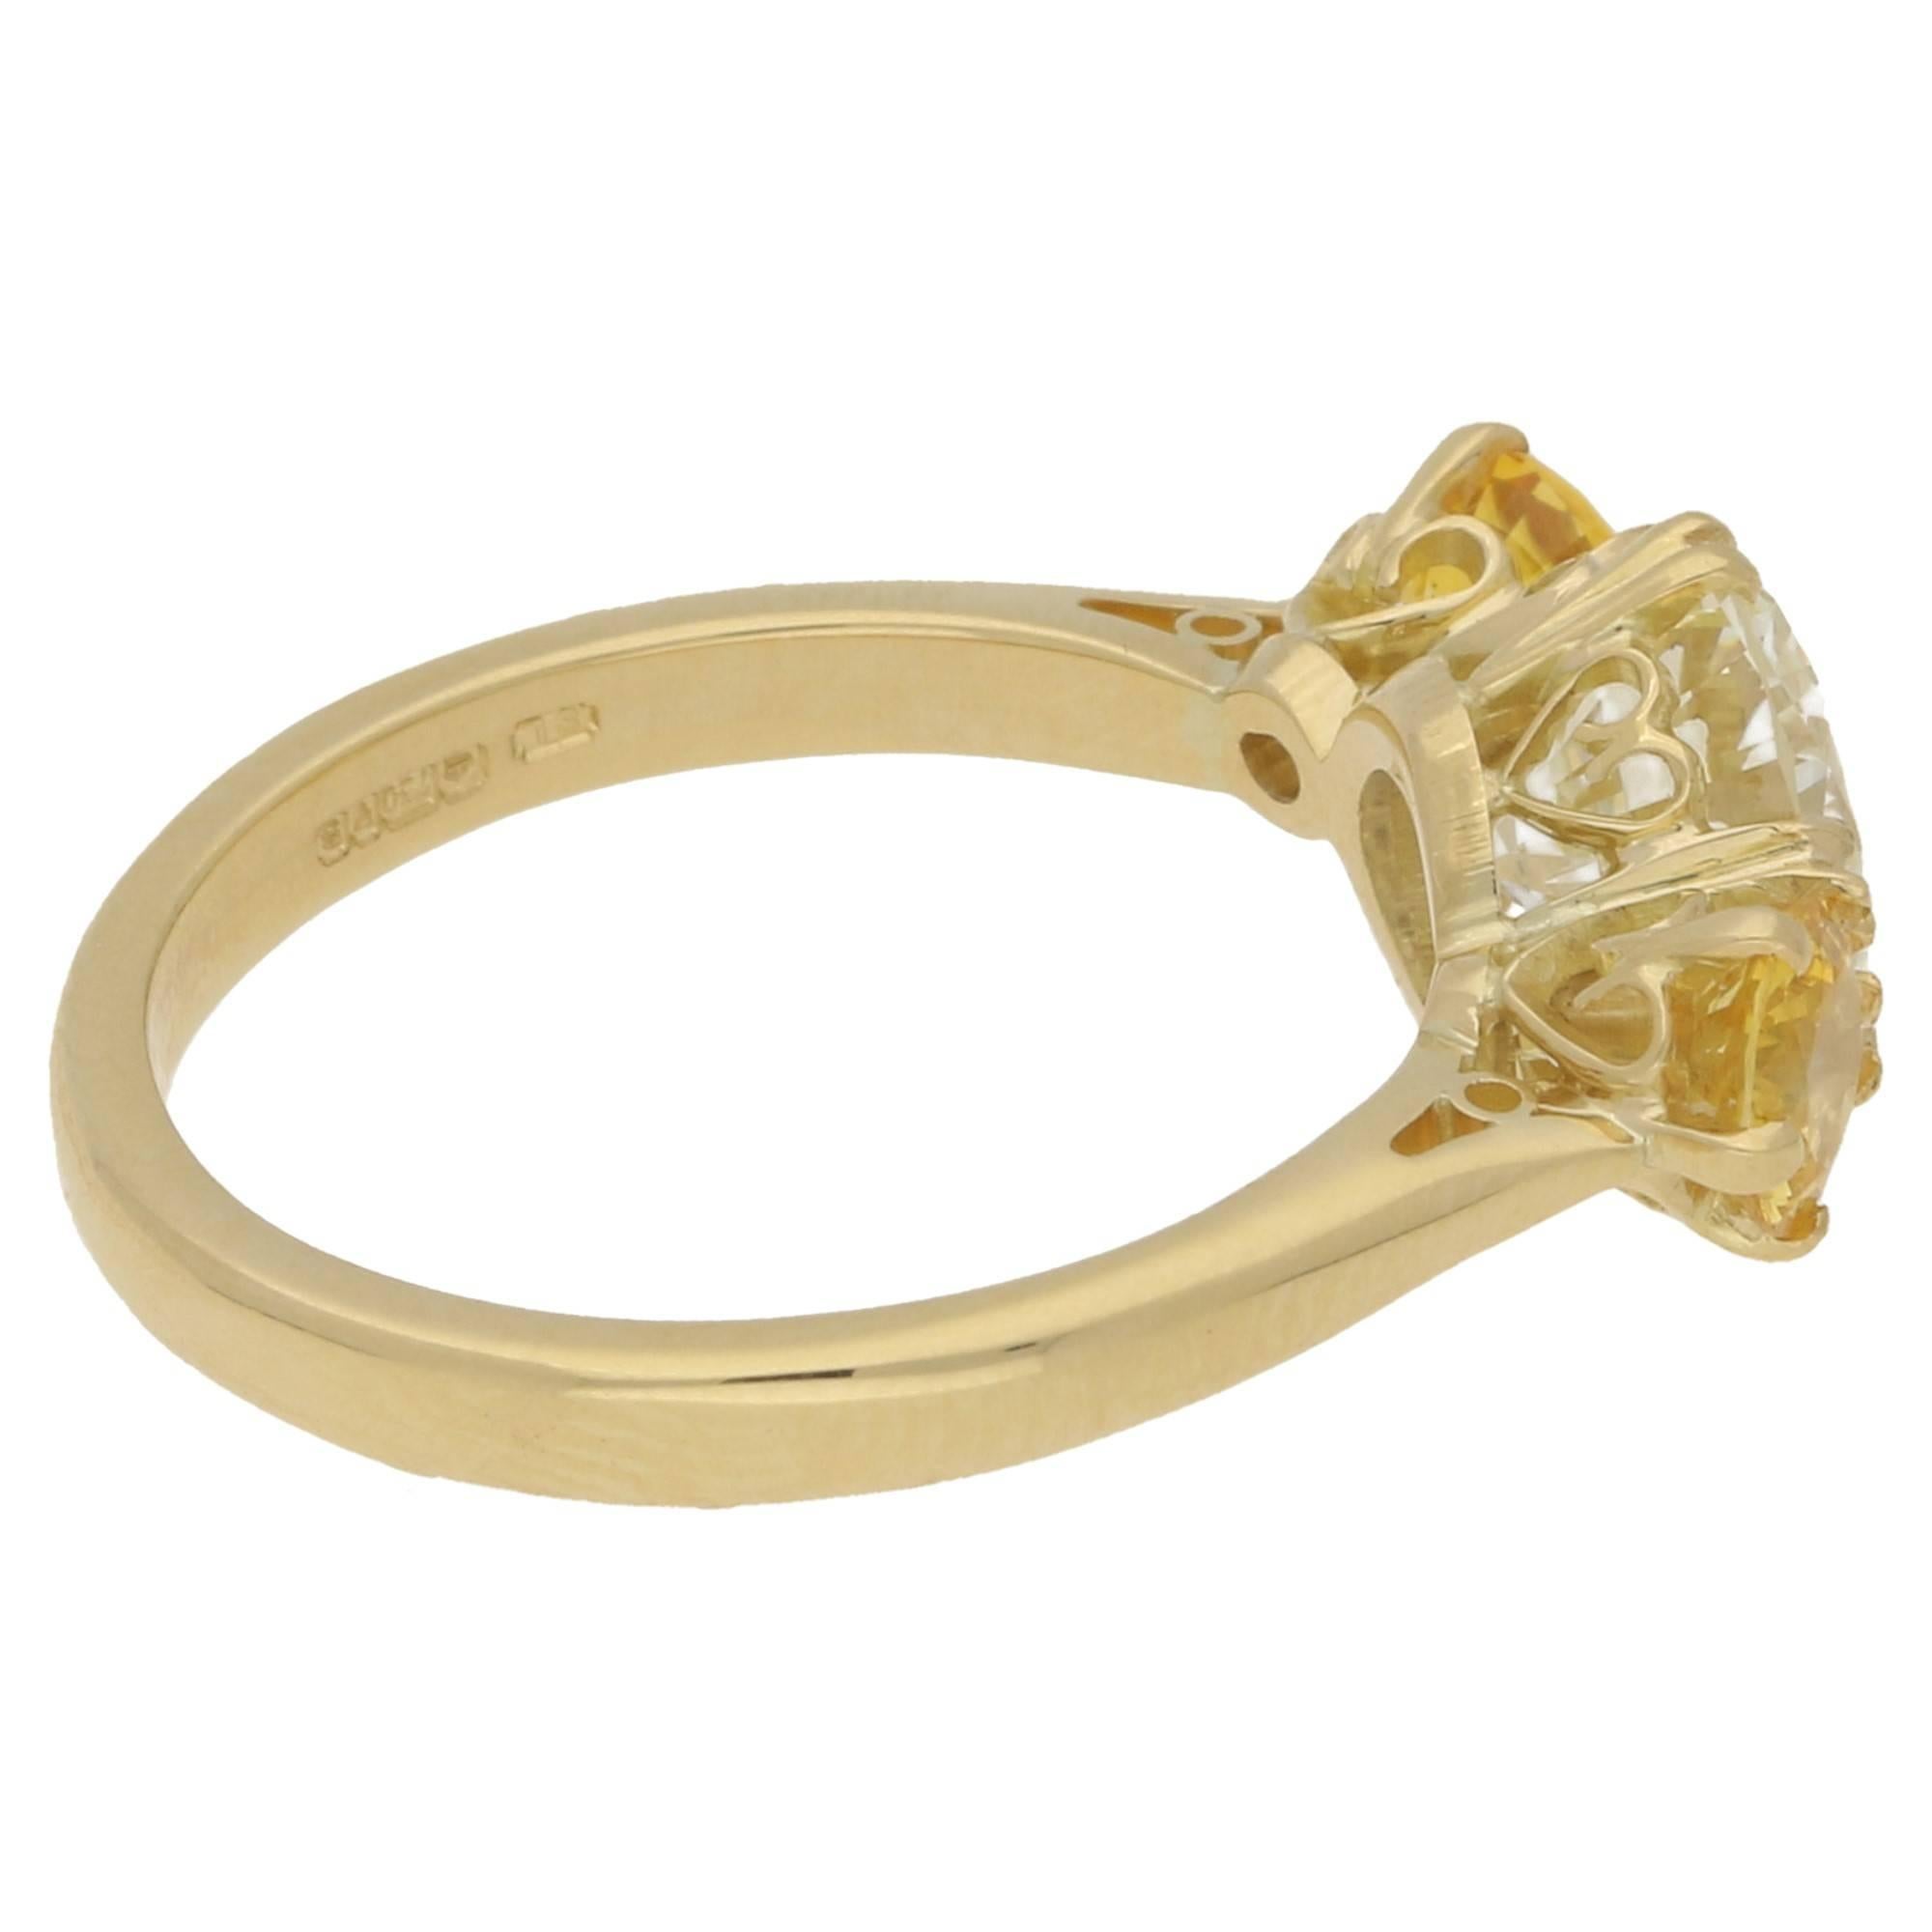 Round Cut Diamond and Yellow Sapphire Ring in 18 Carat Yellow Gold